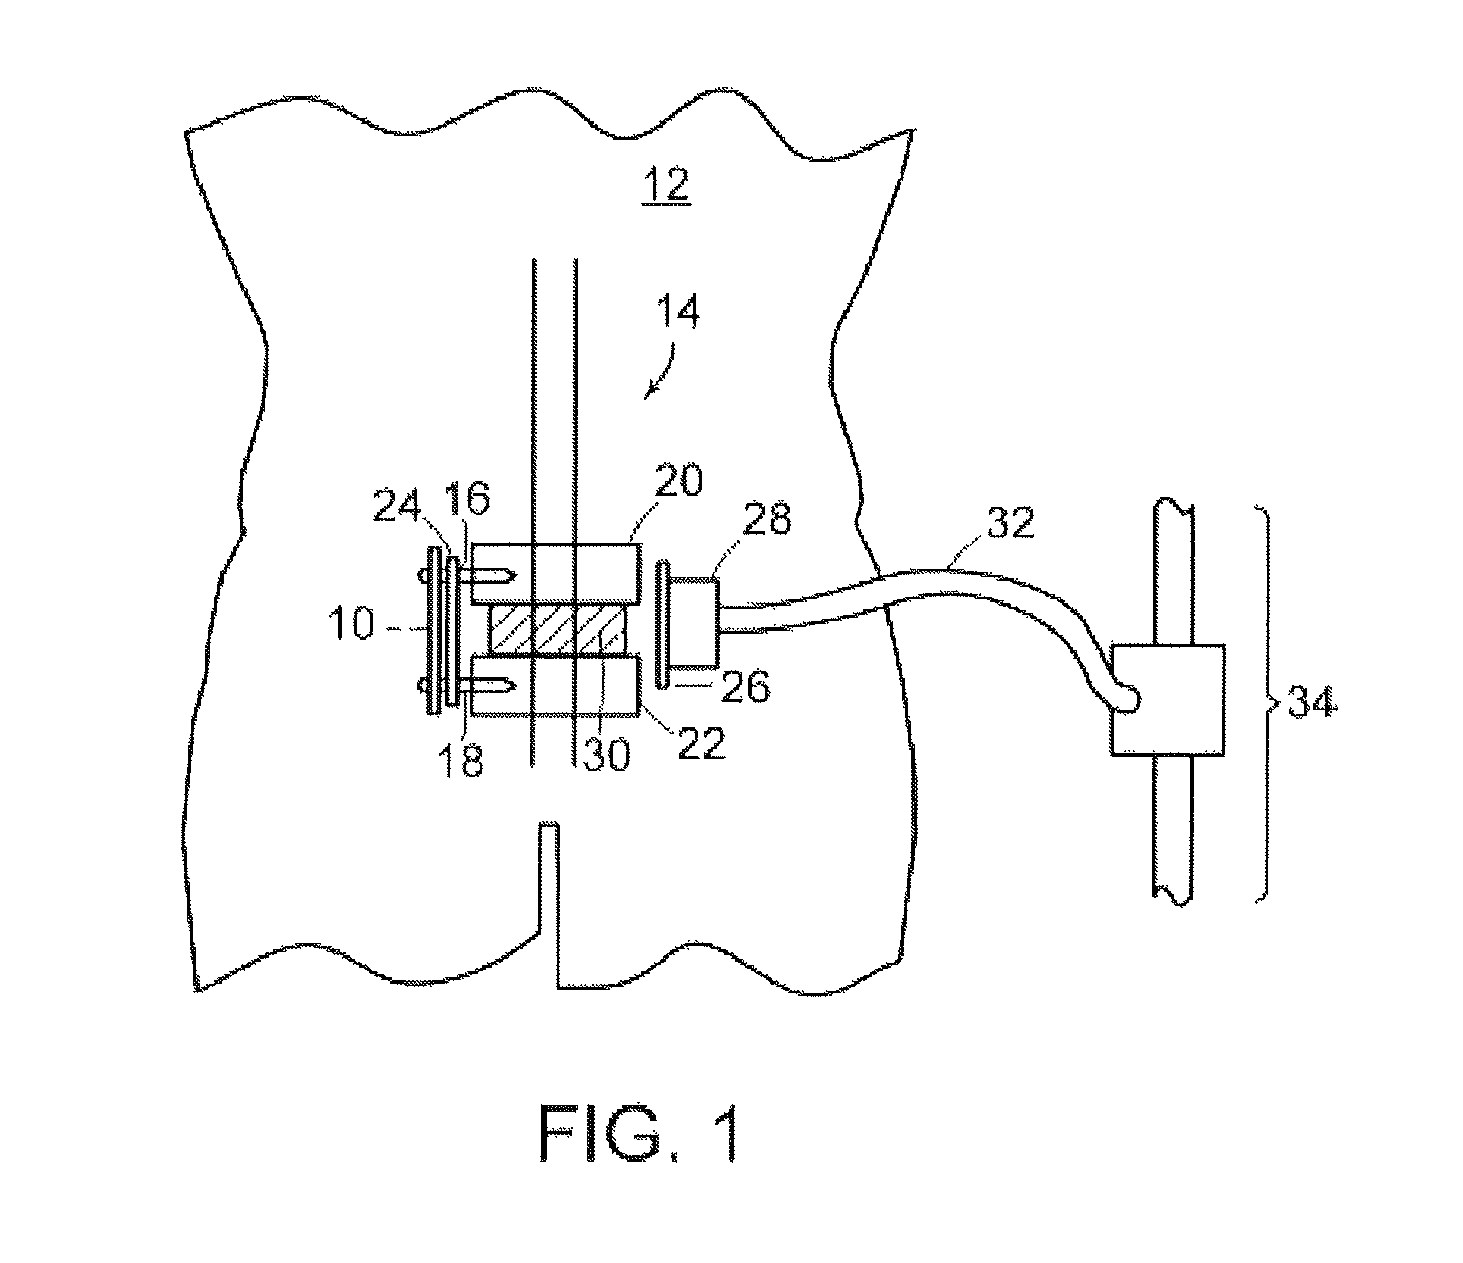 Surgical base unit and retractor support mechanism